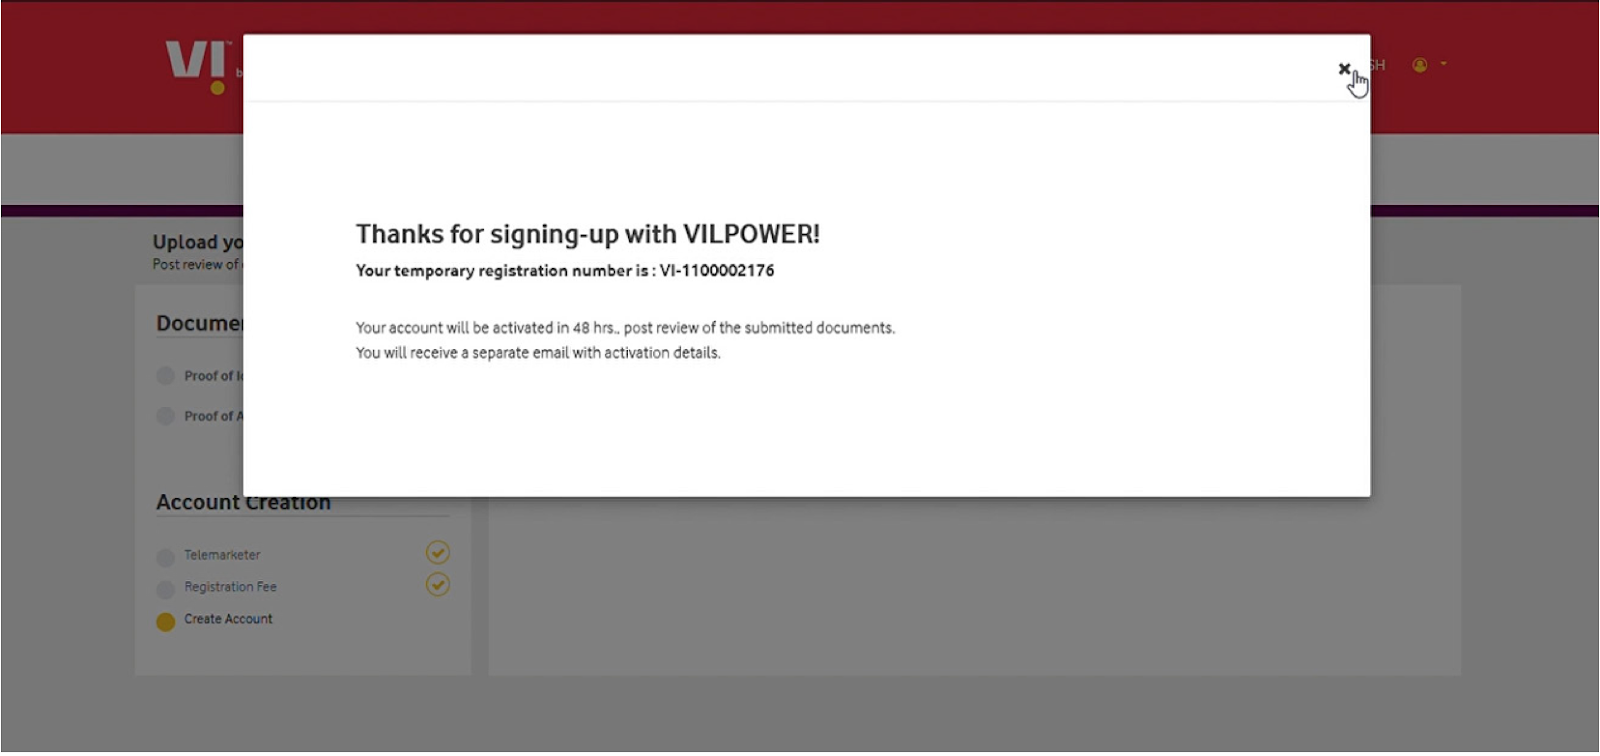 Successful registration screen on the Vodafone DLT registration website with registration number I SMSCountry